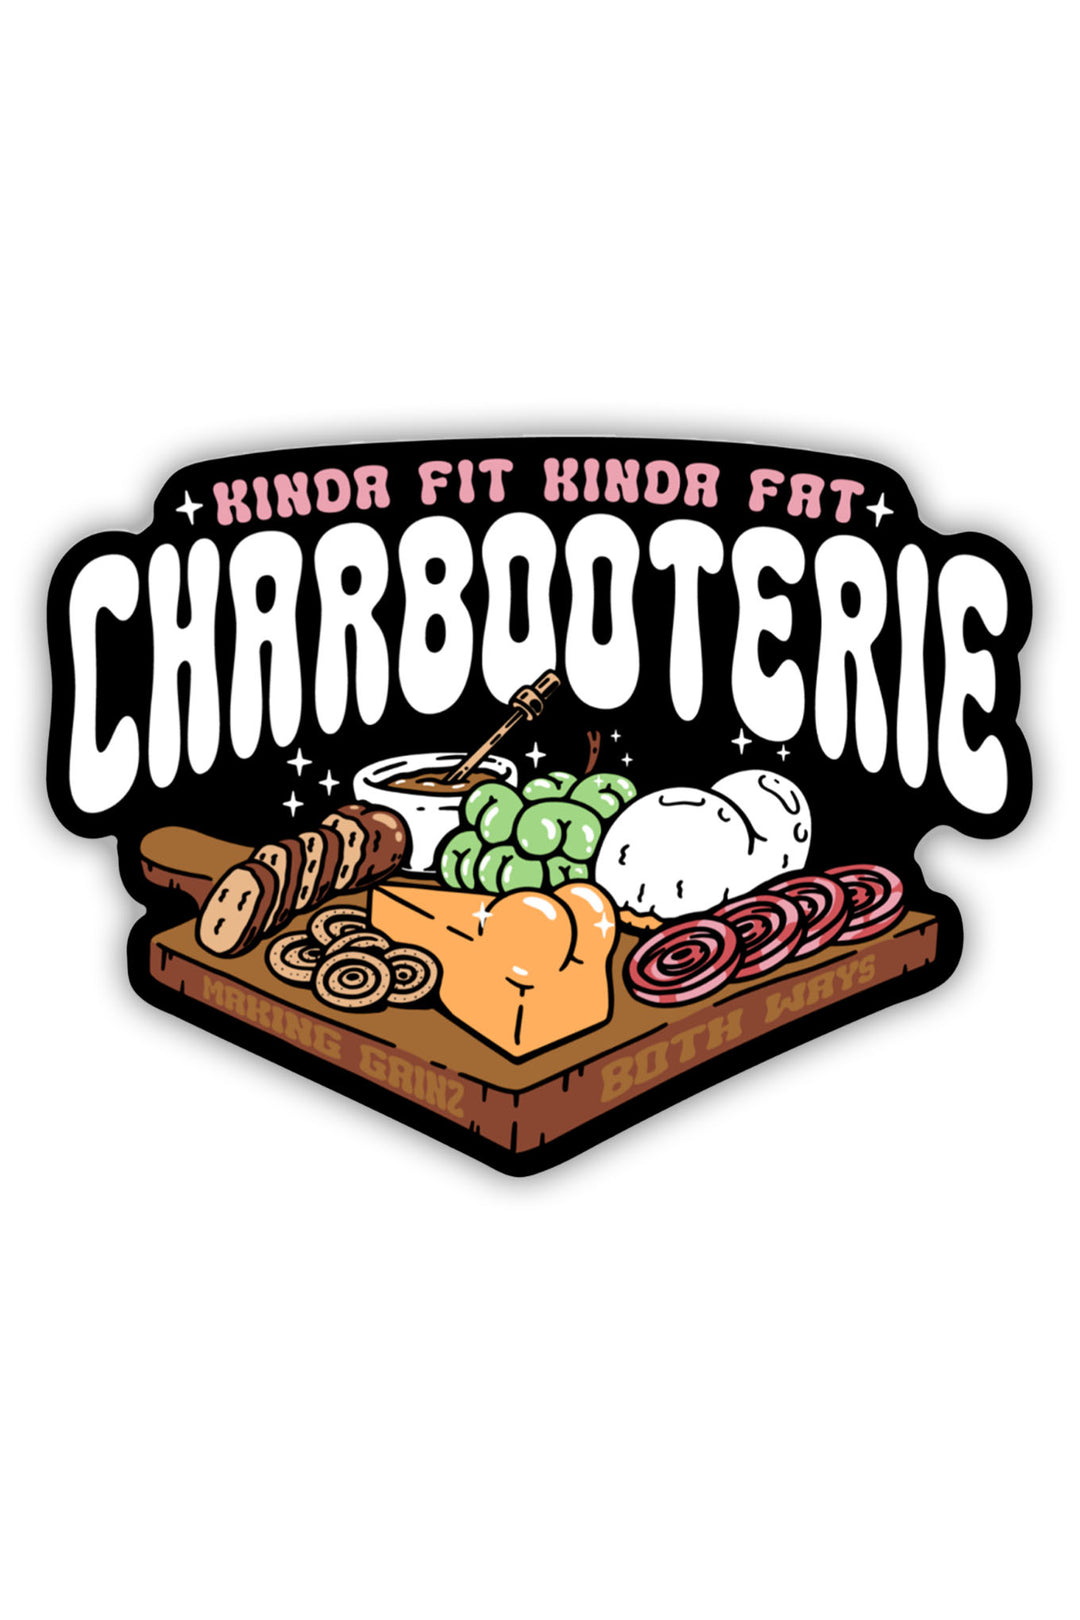 Charbooterie Sticker